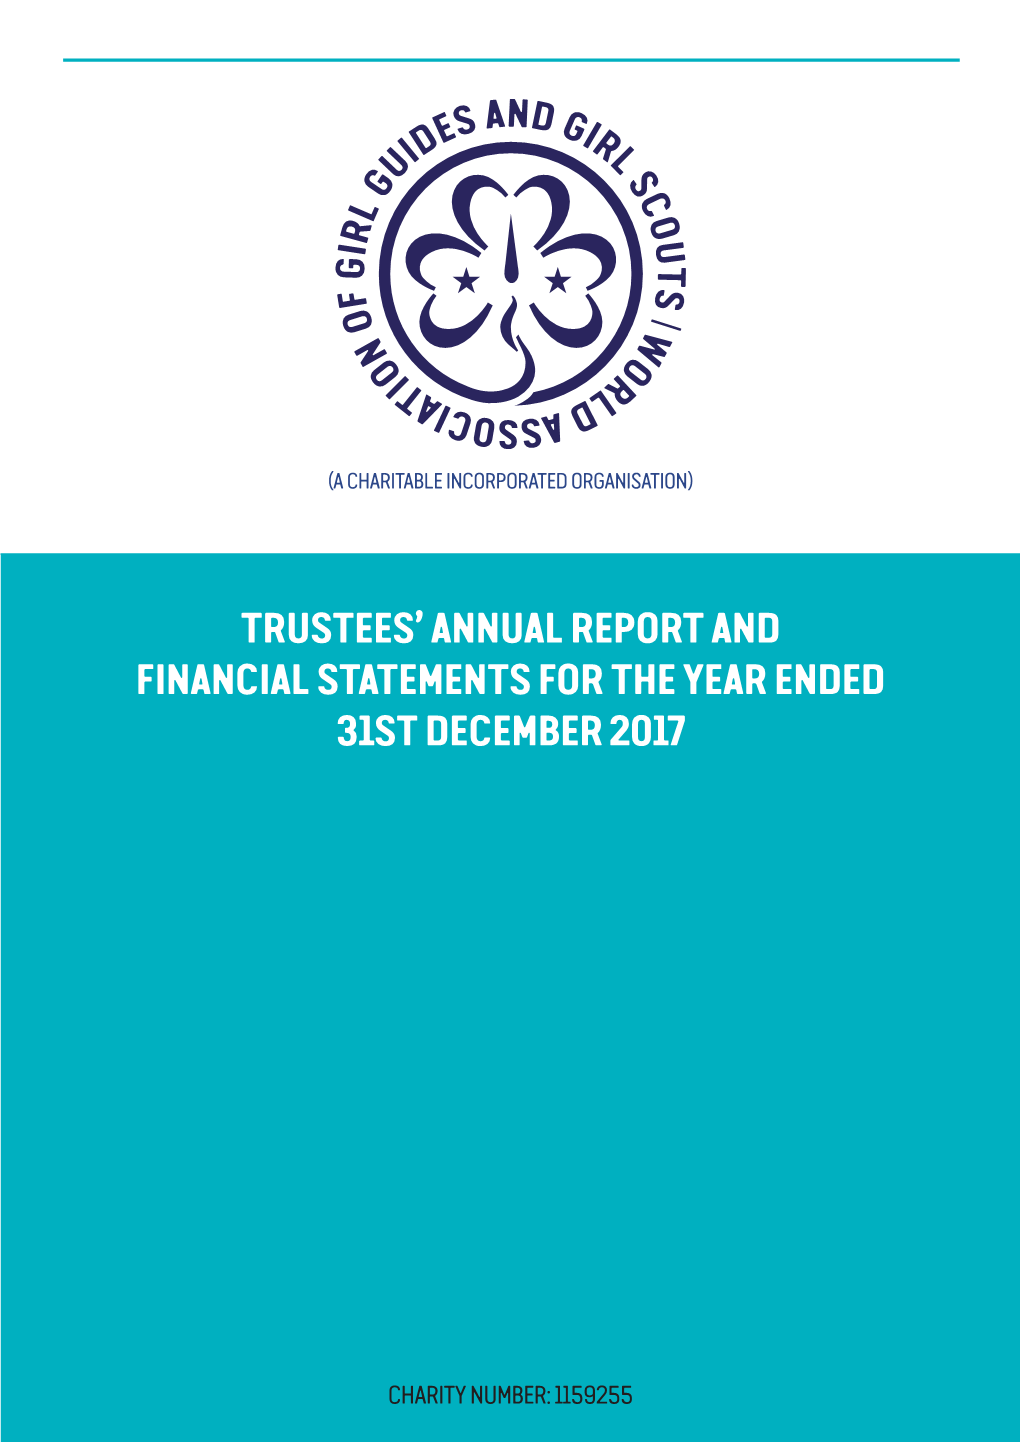 Trustees' Annual Report and Financial Statements for the Year Ended 31St December 2017